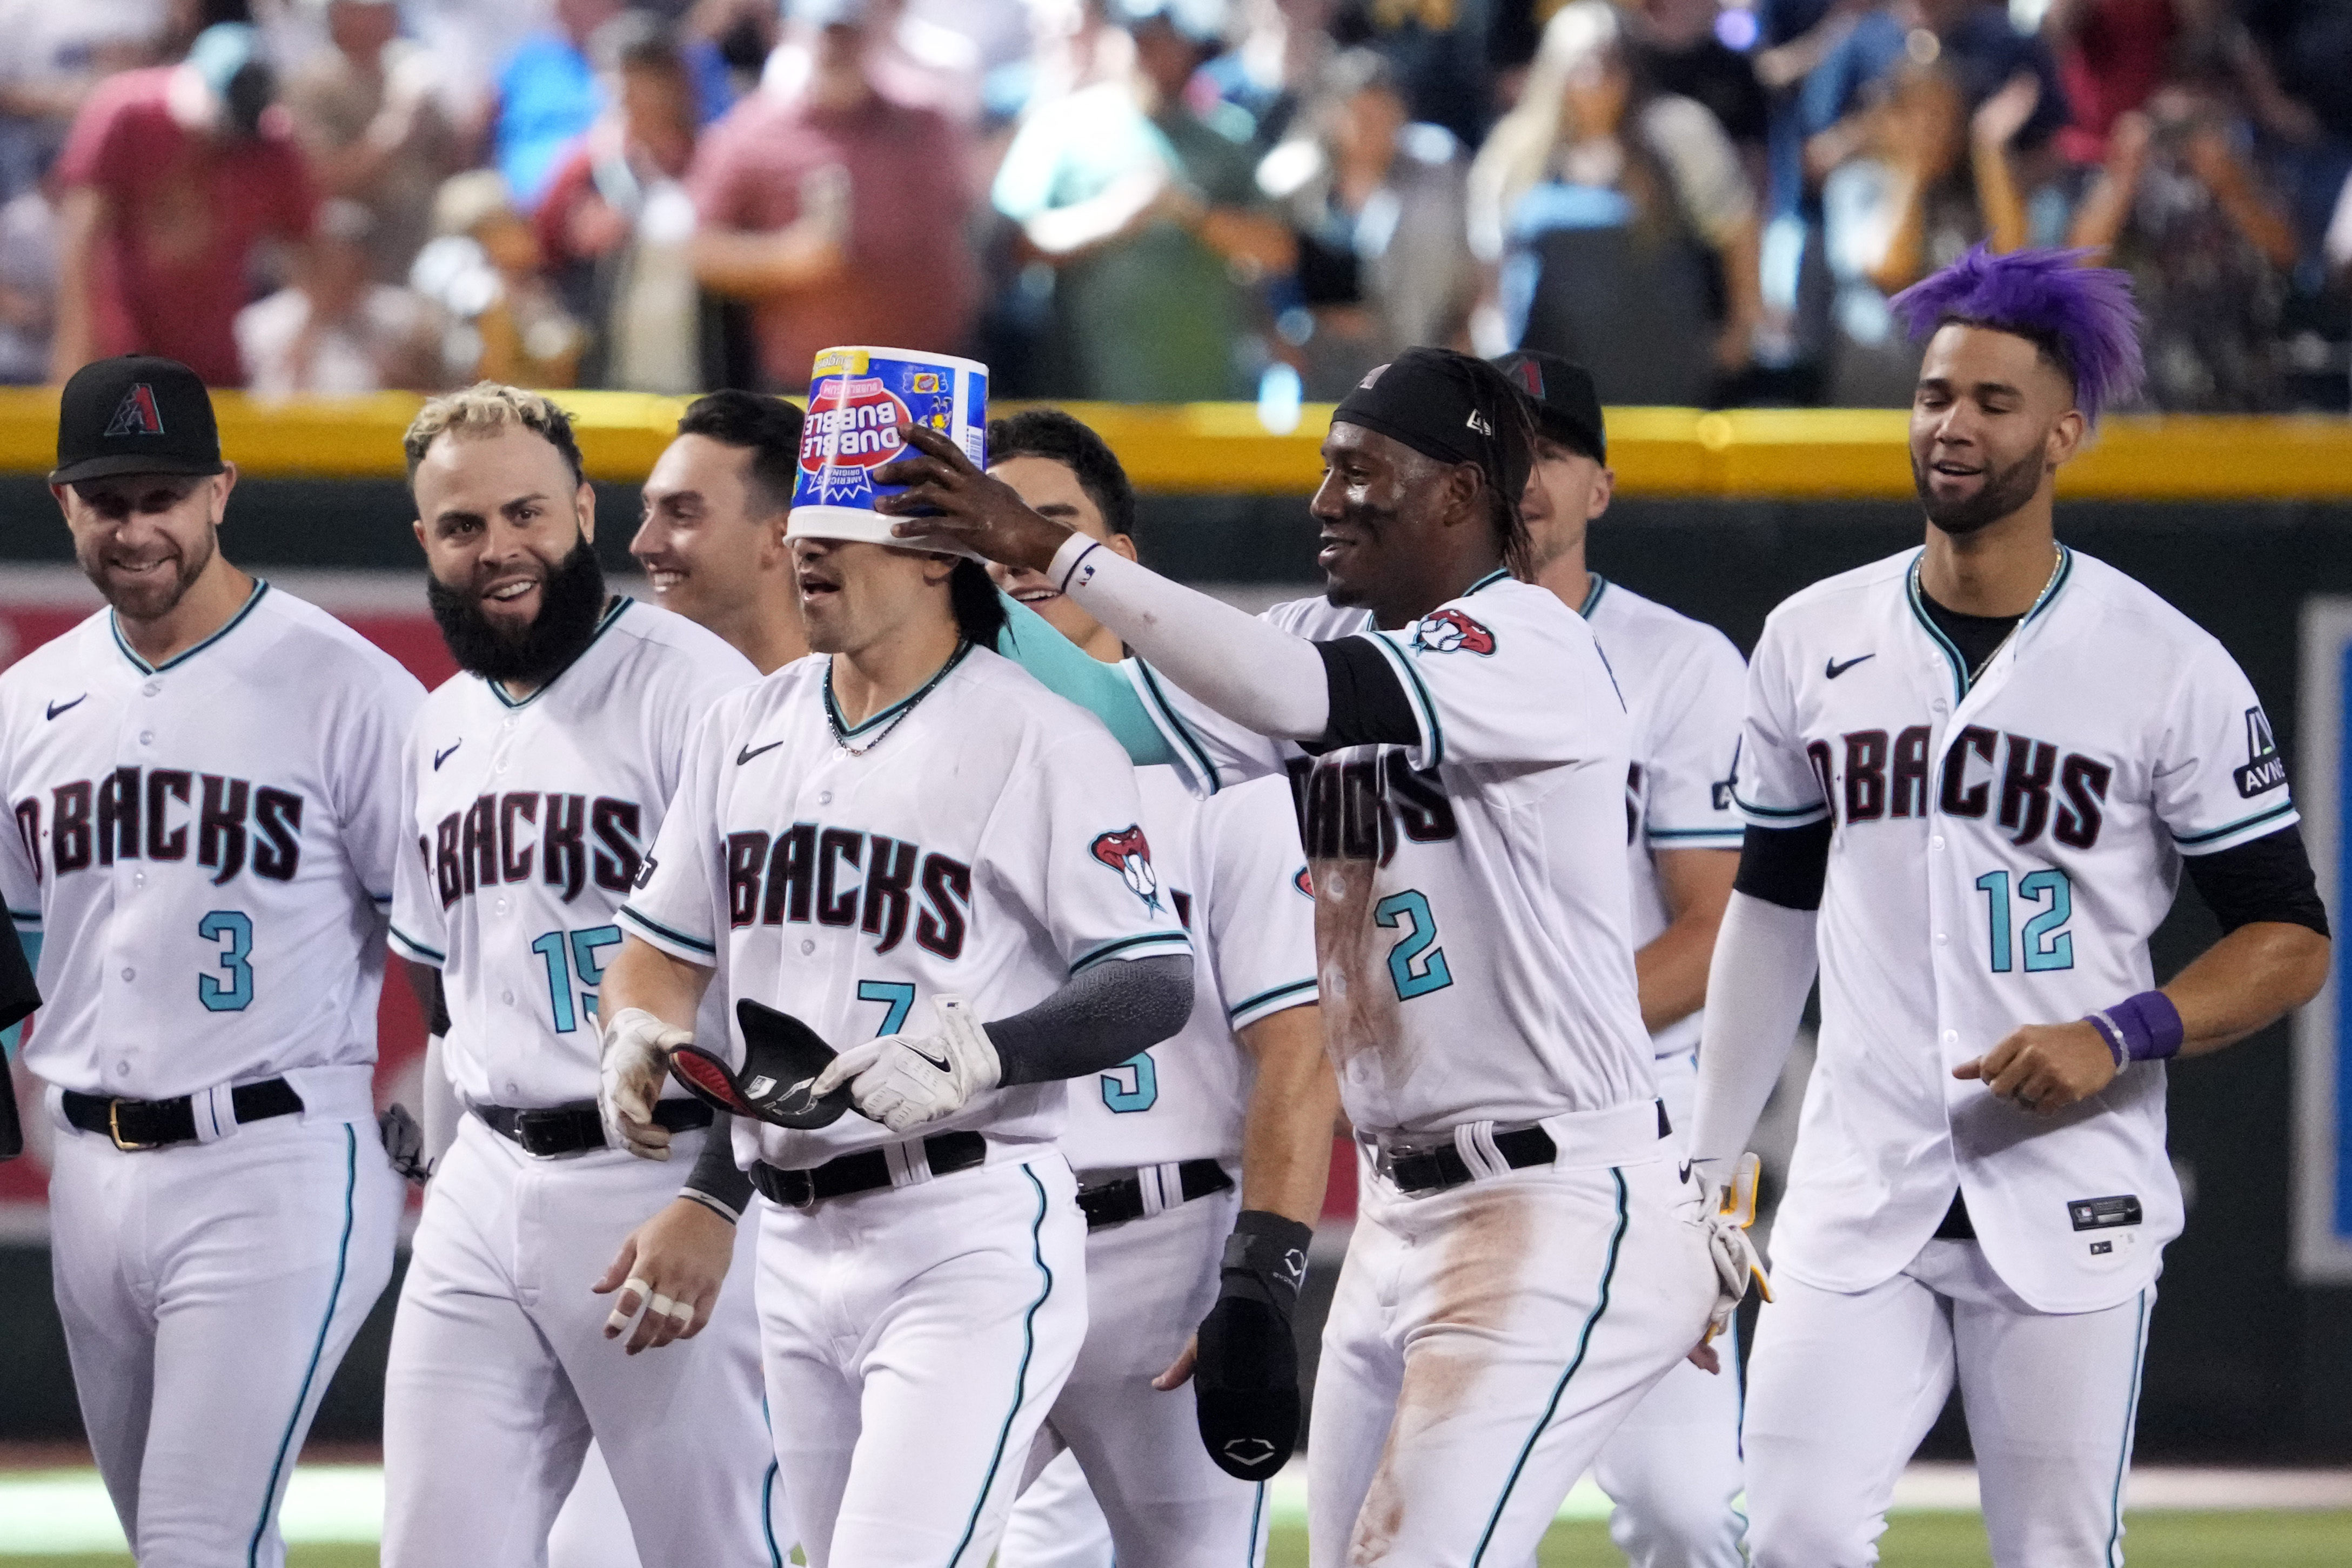 carroll delivers game-winning hit as D-backs top Pirates